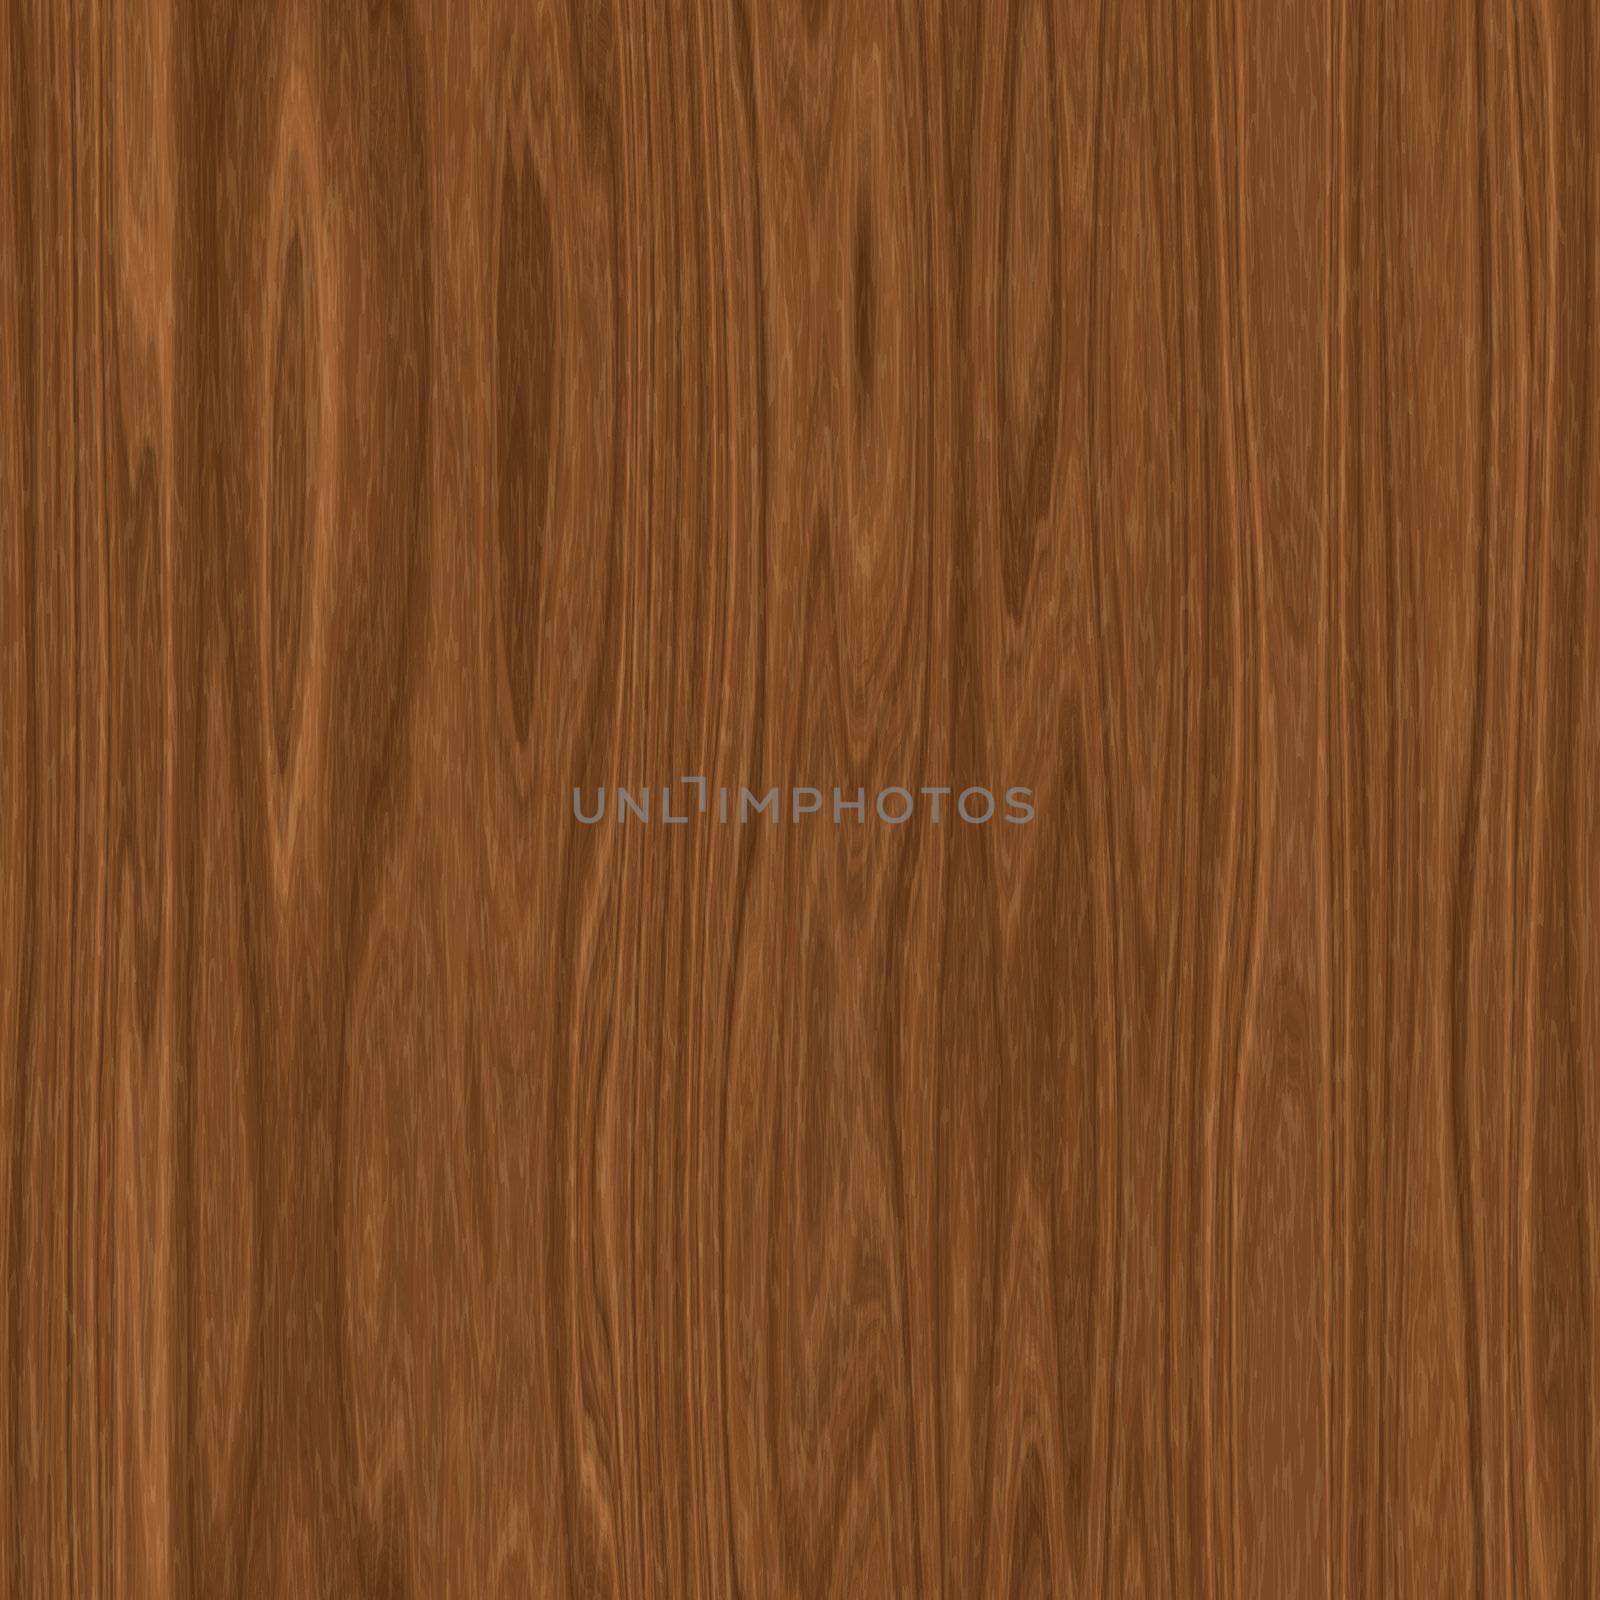 An illustration of a seamless wooden texture